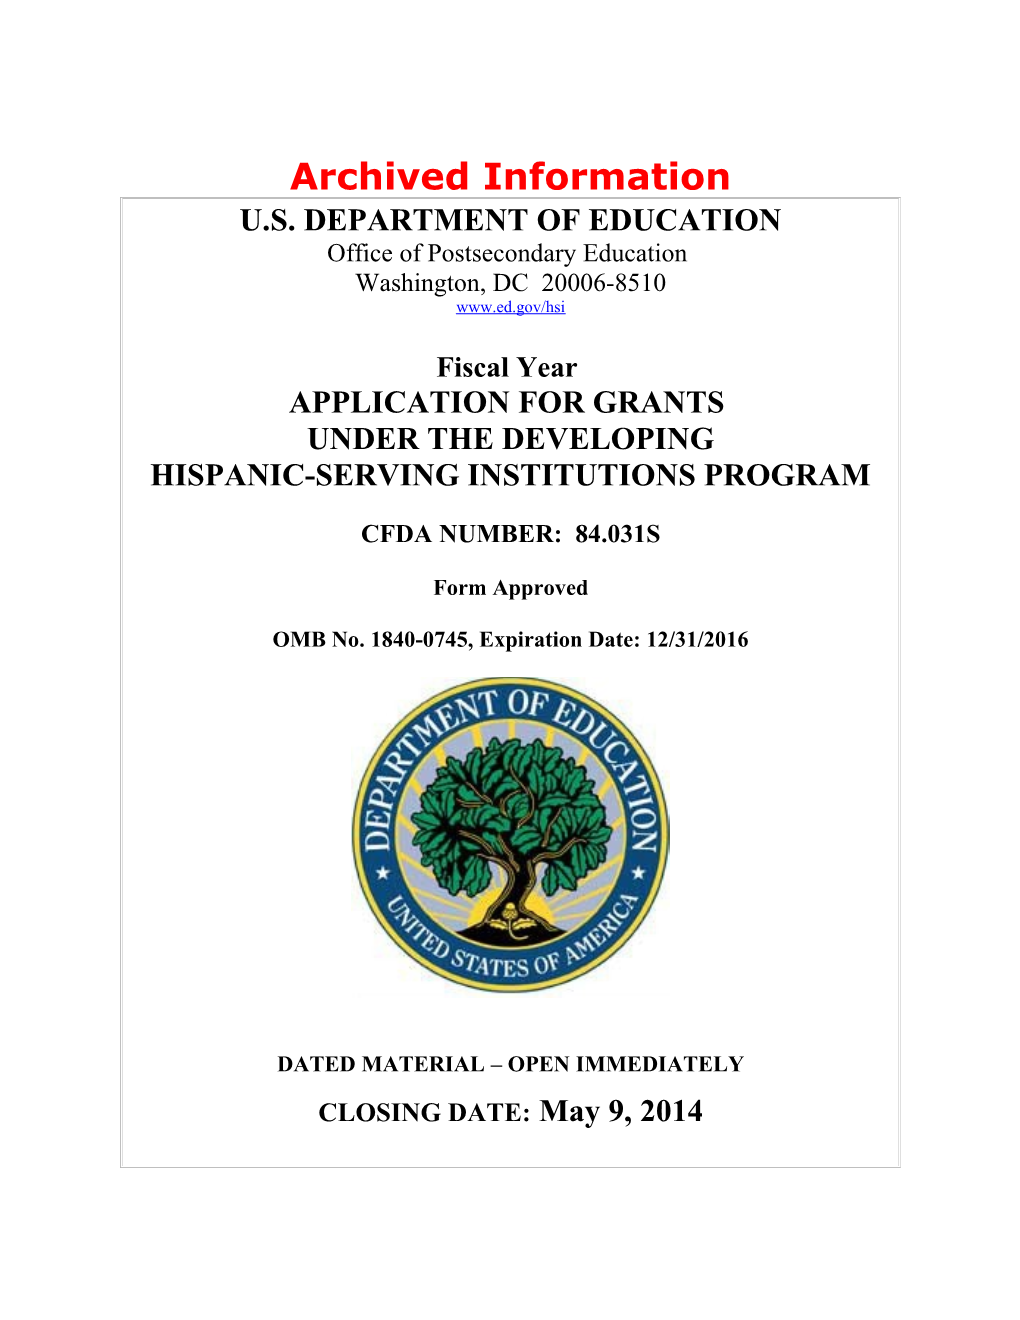 Archived: FY 2014 Application for Grants Under the Title V Developing Hispanic-Serving